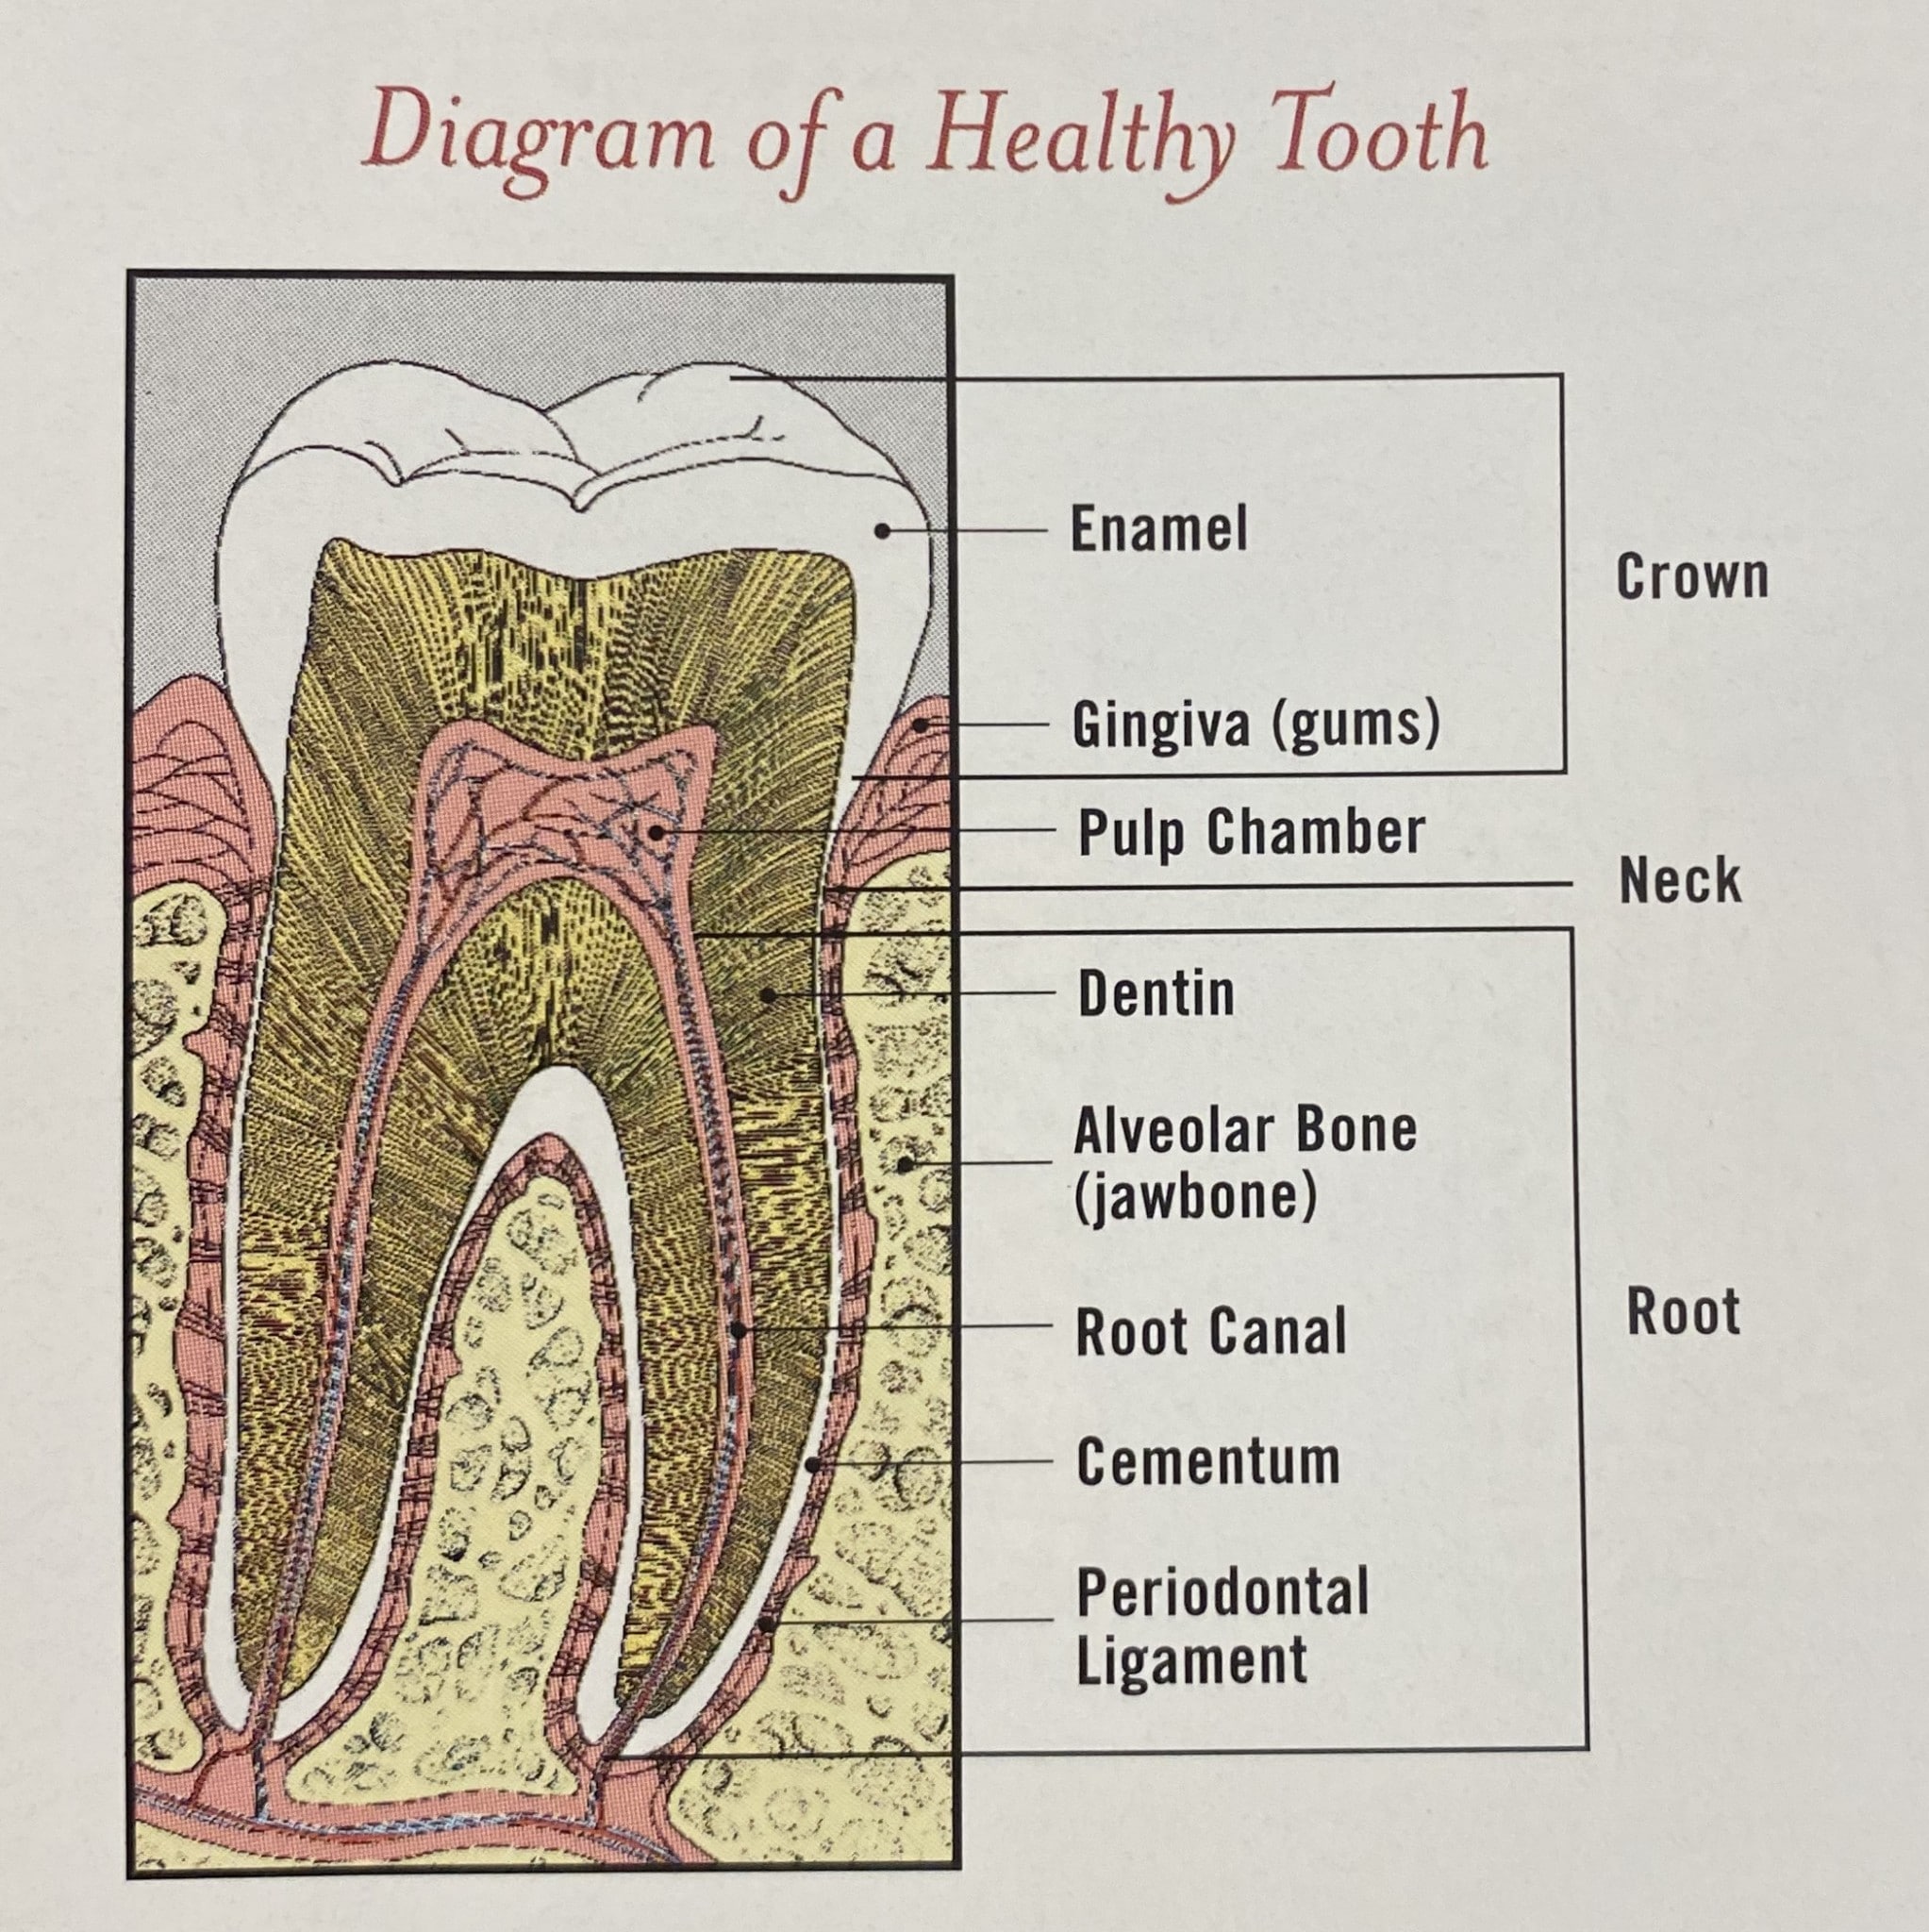 Diagram of a Healthy Tooth